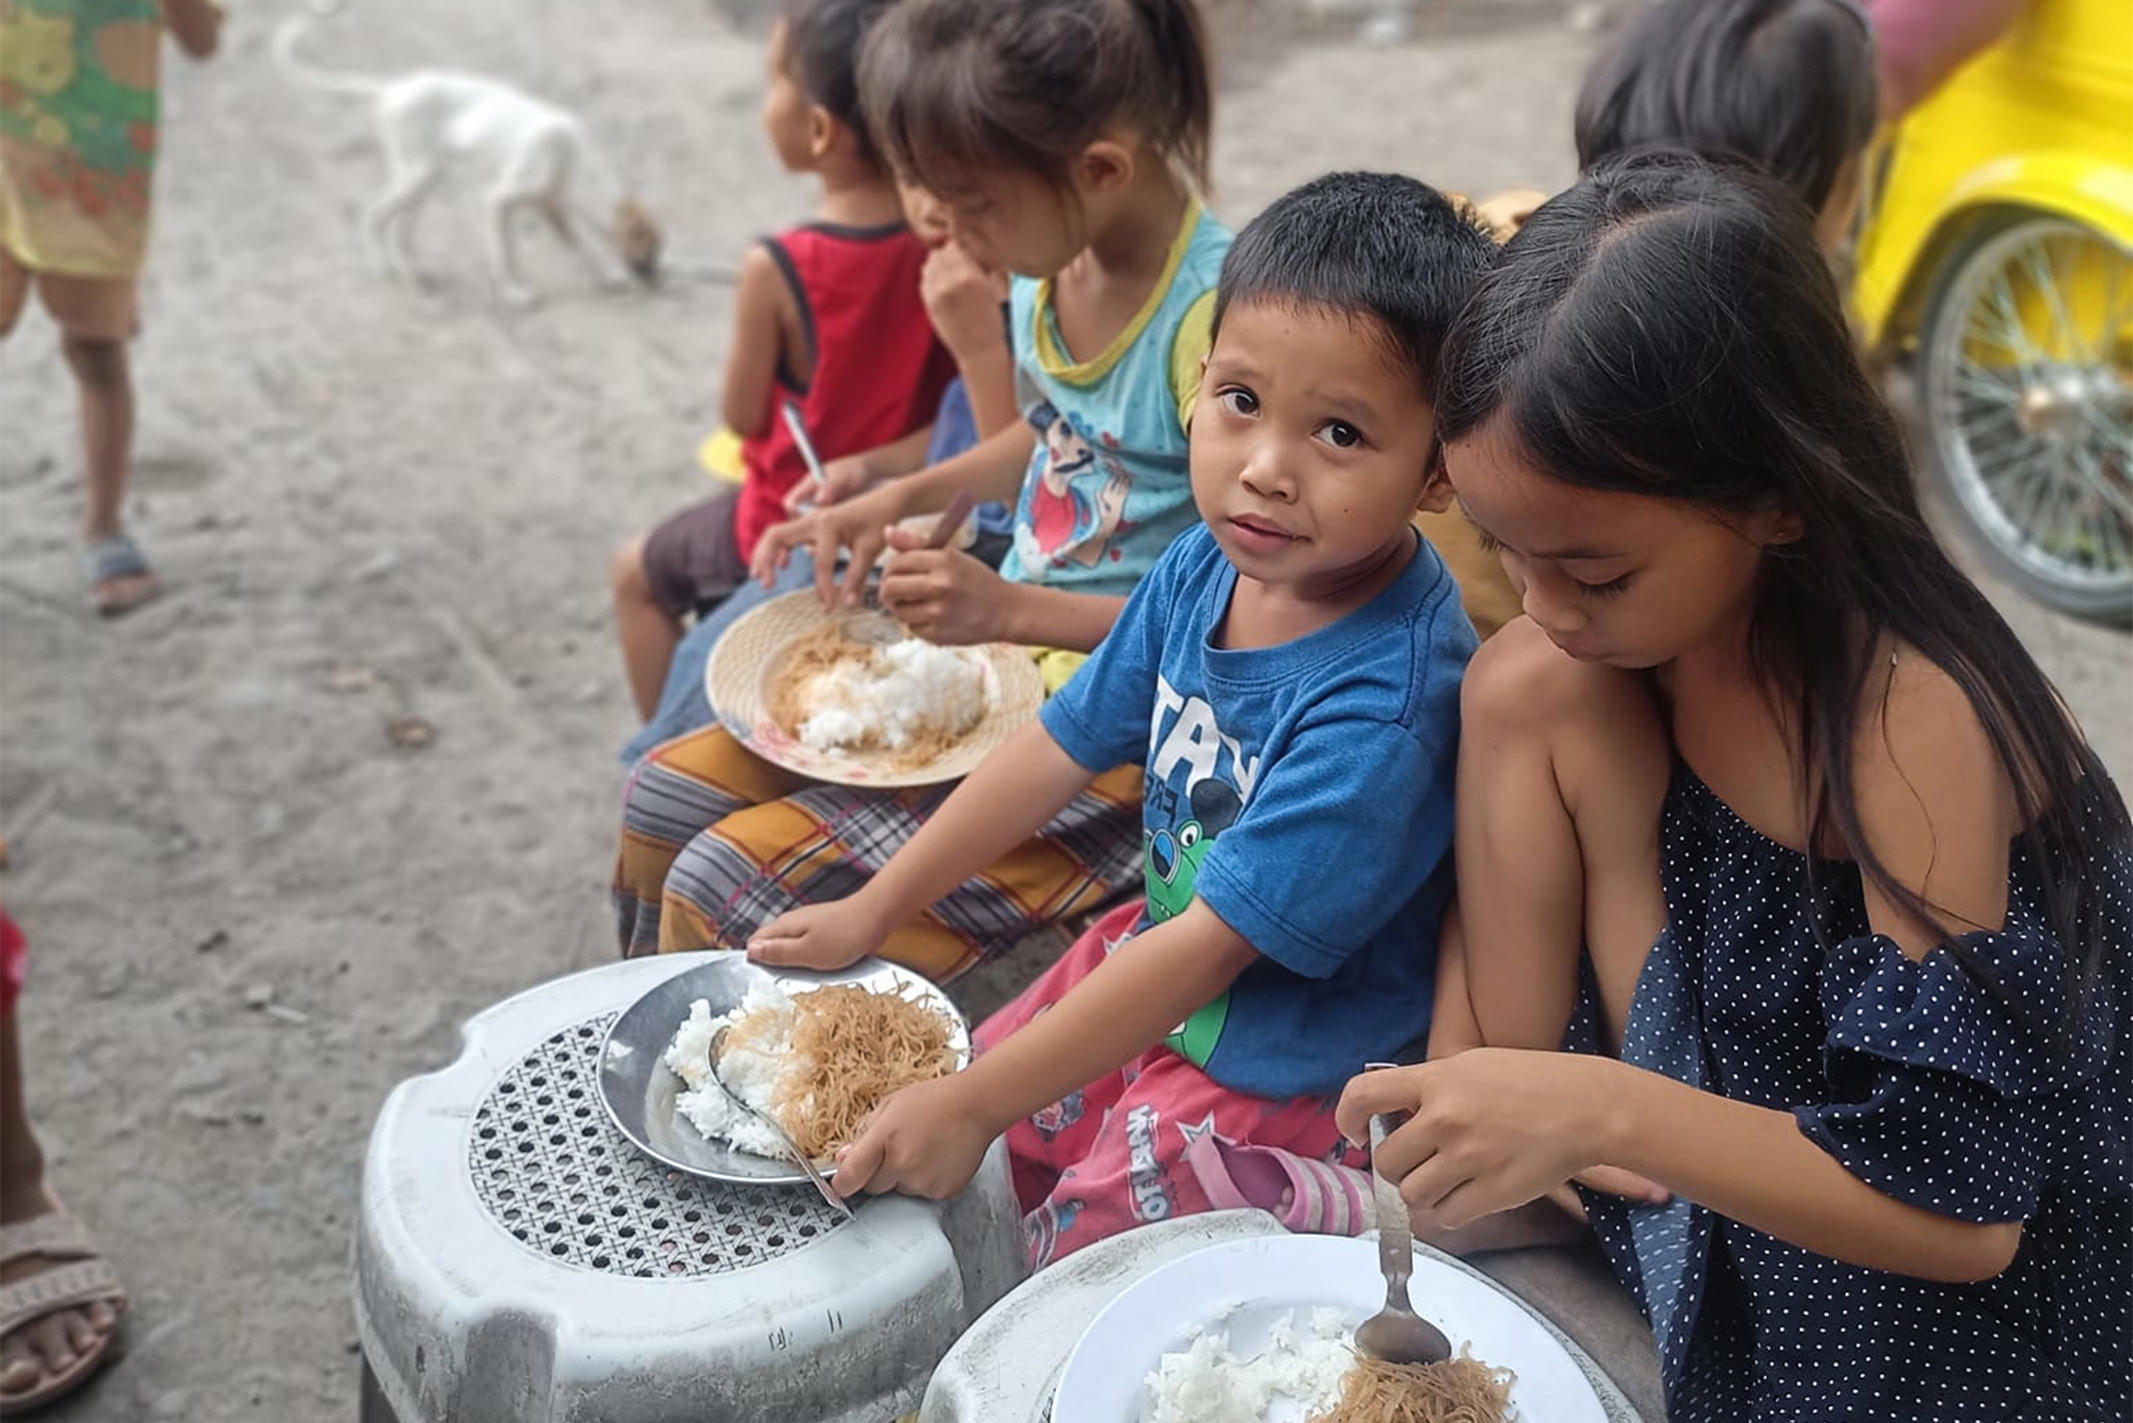 Children in the Philippines sitting outside eating rice and noodles